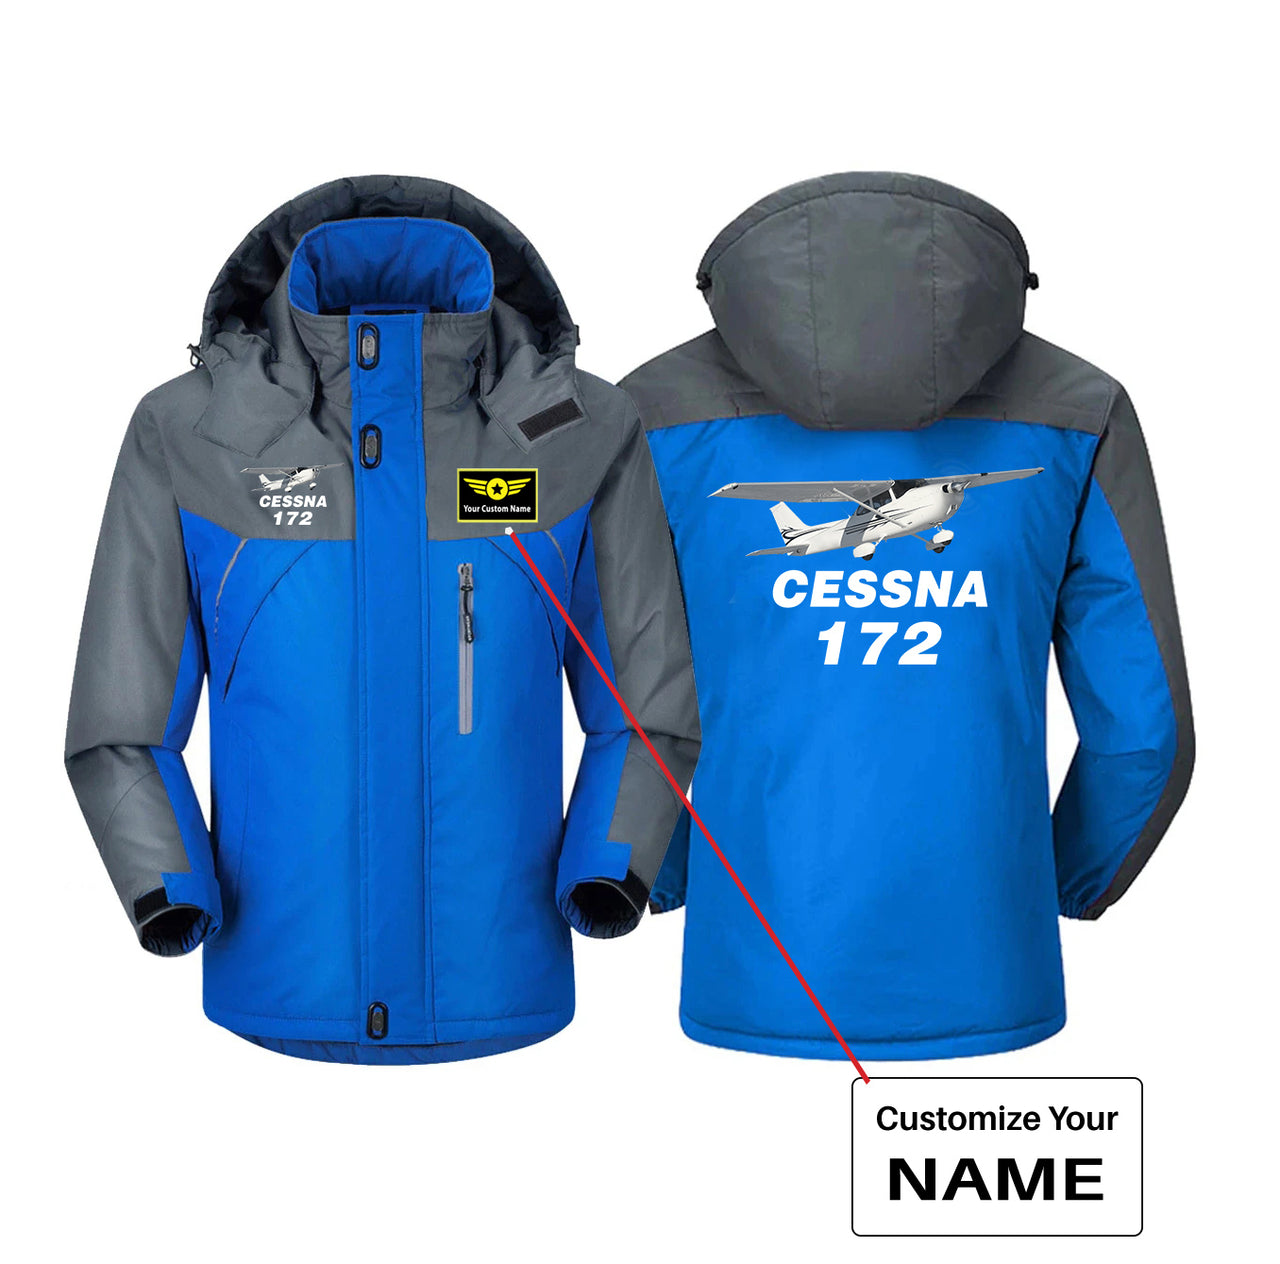 The Cessna 172 Designed Thick Winter Jackets